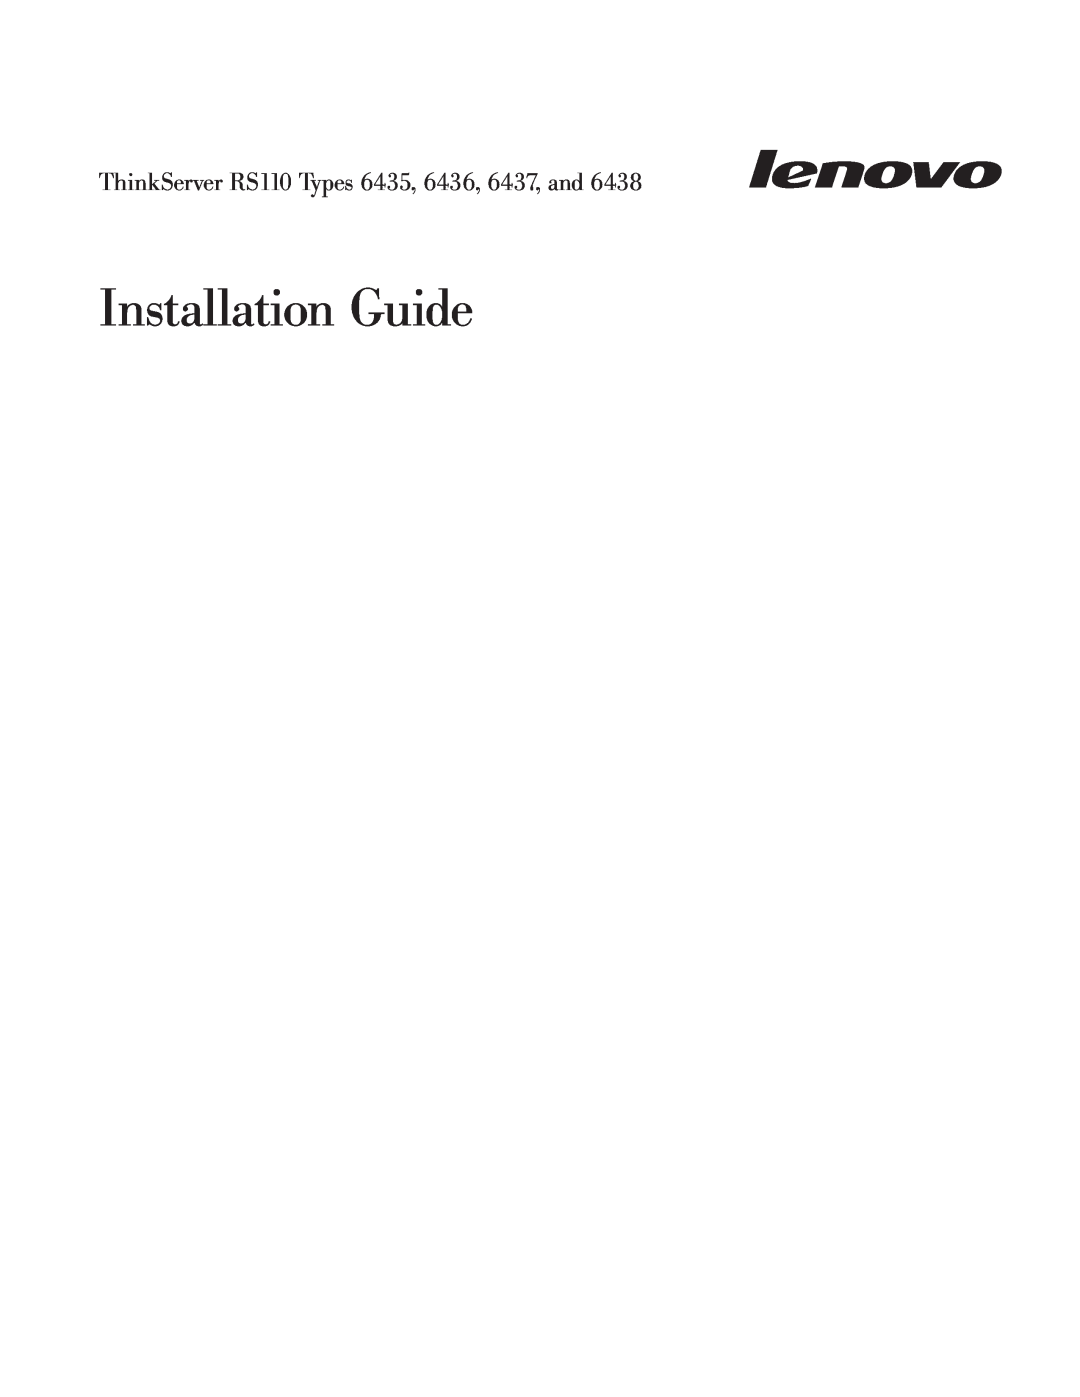 Lenovo 6438 manual User Guide, ThinkServer RS110 Types 6435, 6436, 6437 and 